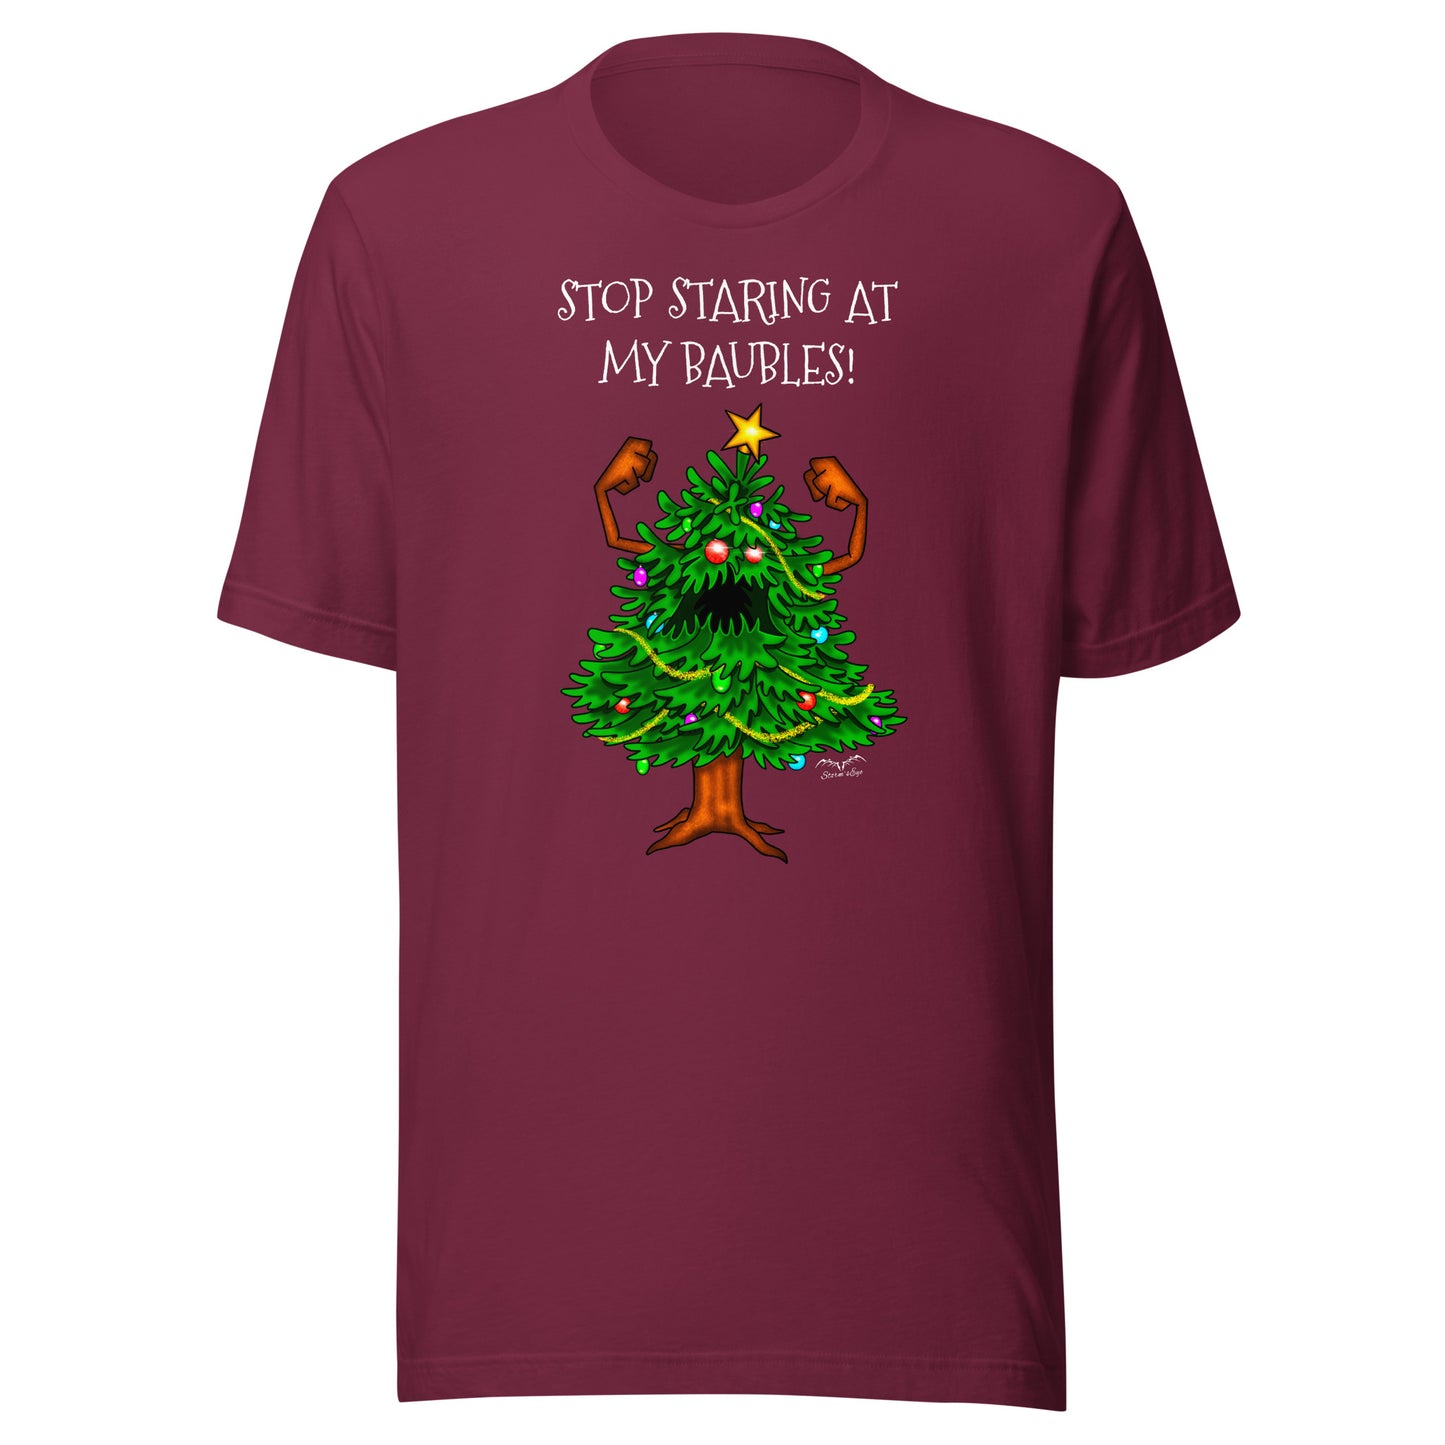 stormseye design angry christmas tree baubles T shirt, flat view maroon red